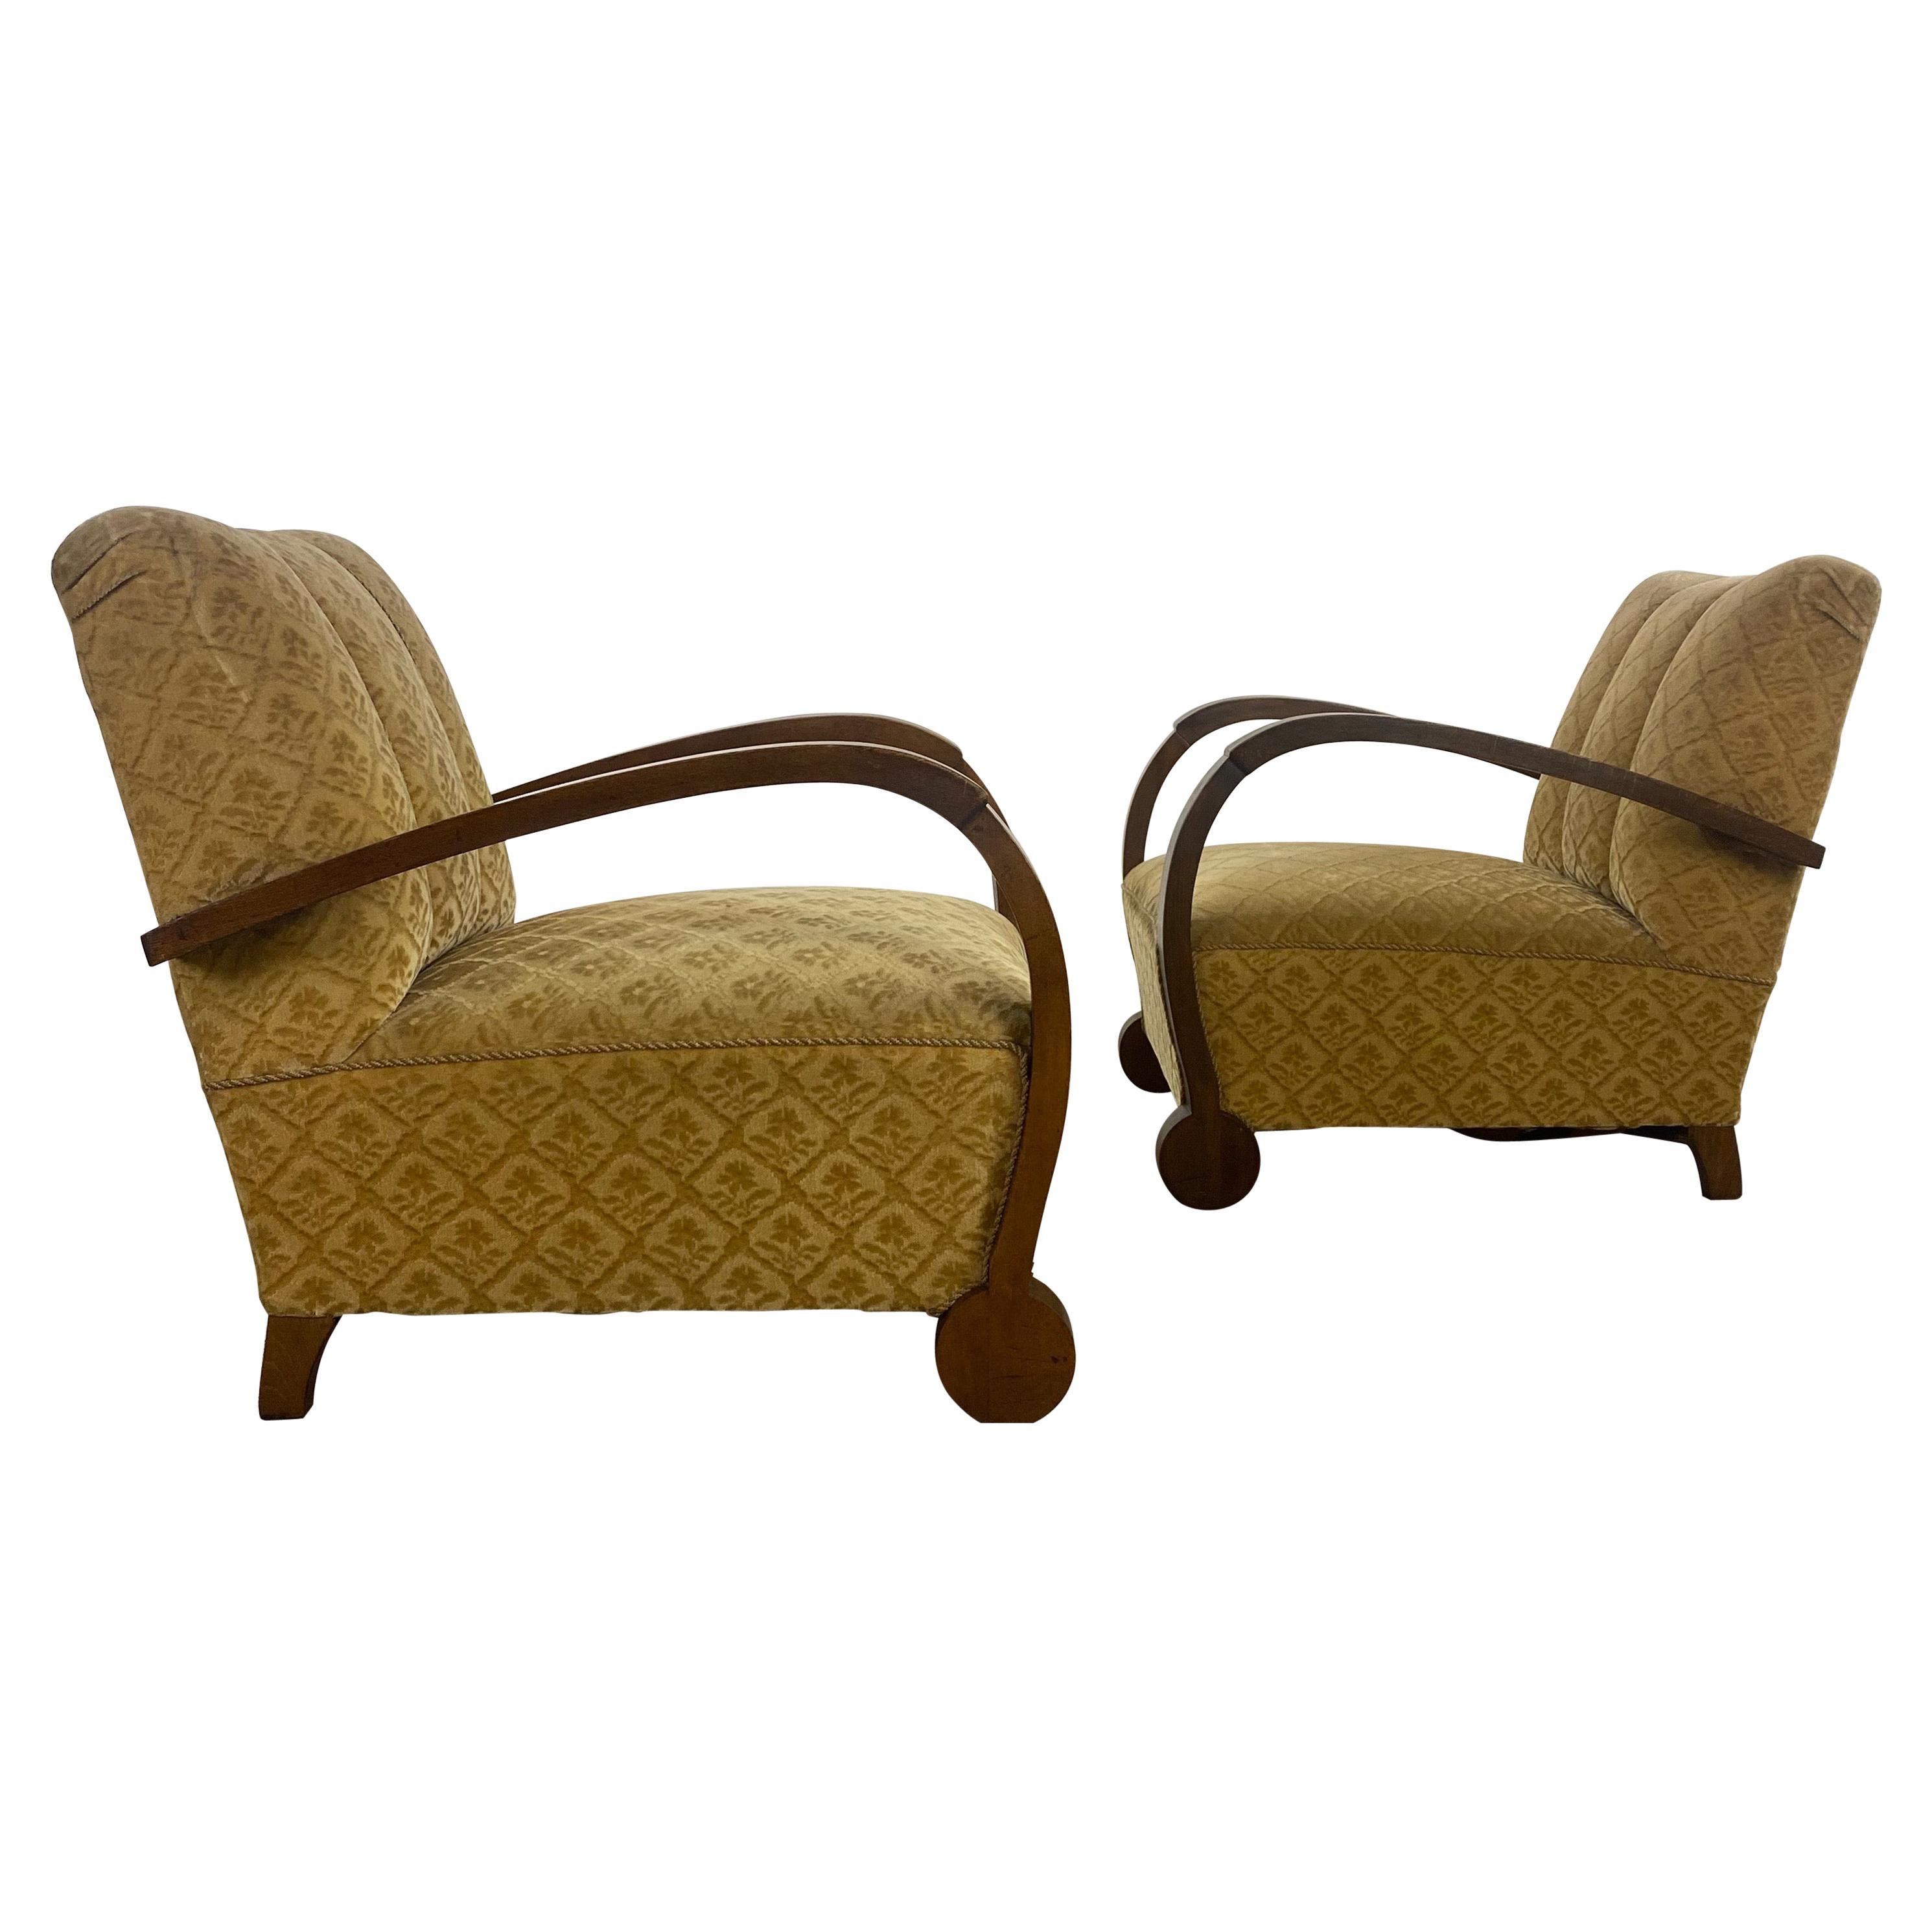 Unusual Pair of Art Deco German Armchairs/Club Chairs from 1920s, Bauhaus Style